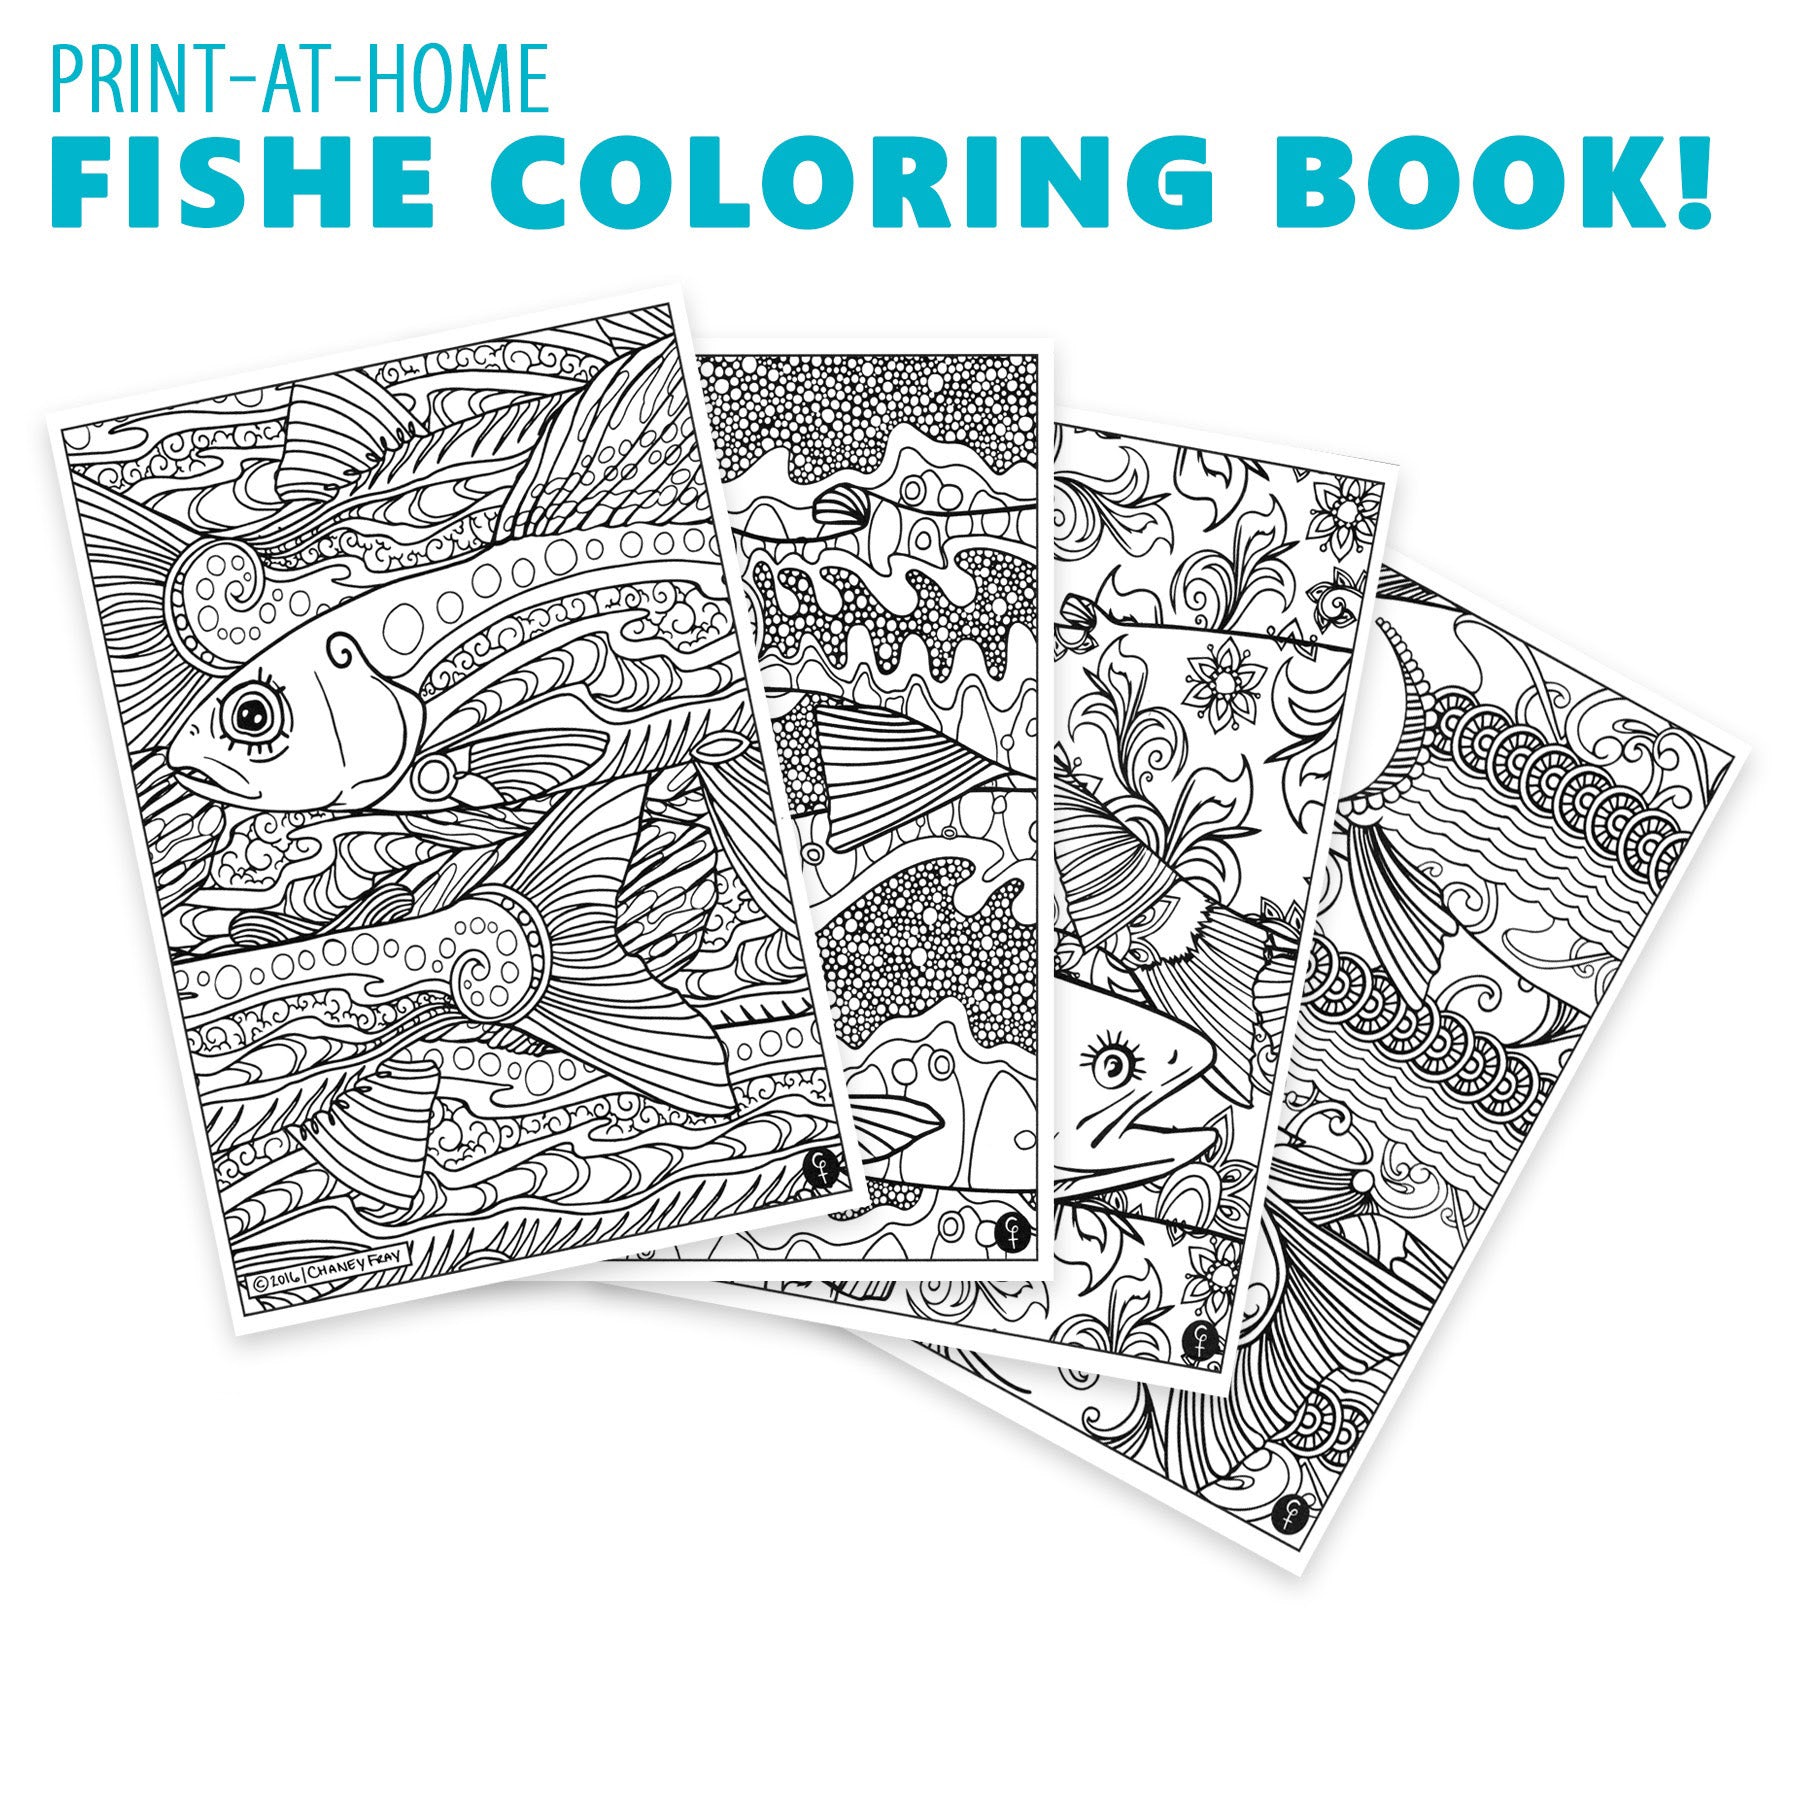 2016 Fishe Coloring Book!